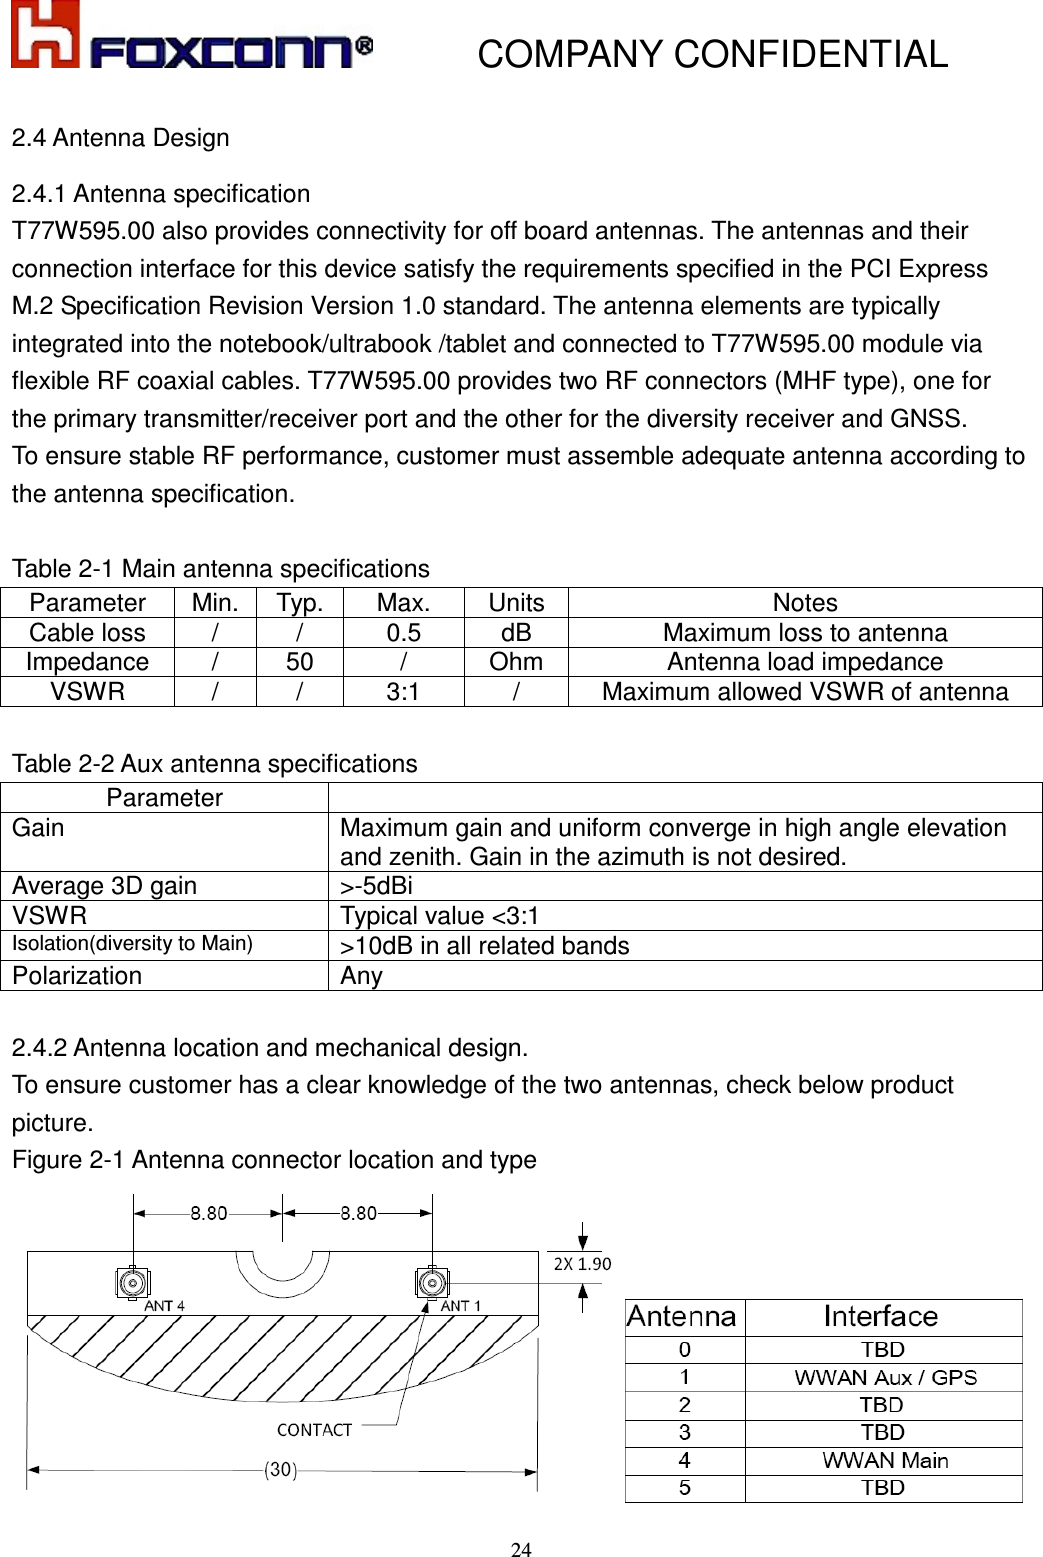           COMPANY CONFIDENTIAL    24 2.4 Antenna Design 2.4.1 Antenna specification T77W595.00 also provides connectivity for off board antennas. The antennas and their connection interface for this device satisfy the requirements specified in the PCI Express M.2 Specification Revision Version 1.0 standard. The antenna elements are typically integrated into the notebook/ultrabook /tablet and connected to T77W595.00 module via flexible RF coaxial cables. T77W595.00 provides two RF connectors (MHF type), one for the primary transmitter/receiver port and the other for the diversity receiver and GNSS.   To ensure stable RF performance, customer must assemble adequate antenna according to the antenna specification.  Table 2-1 Main antenna specifications Parameter  Min. Typ.  Max.  Units  Notes Cable loss  /  /  0.5  dB  Maximum loss to antenna Impedance  /  50  /  Ohm  Antenna load impedance VSWR  /  /  3:1  /  Maximum allowed VSWR of antenna  Table 2-2 Aux antenna specifications Parameter   Gain  Maximum gain and uniform converge in high angle elevation and zenith. Gain in the azimuth is not desired. Average 3D gain  &gt;-5dBi VSWR  Typical value &lt;3:1 Isolation(diversity to Main) &gt;10dB in all related bands Polarization  Any  2.4.2 Antenna location and mechanical design.   To ensure customer has a clear knowledge of the two antennas, check below product picture. Figure 2-1 Antenna connector location and type  